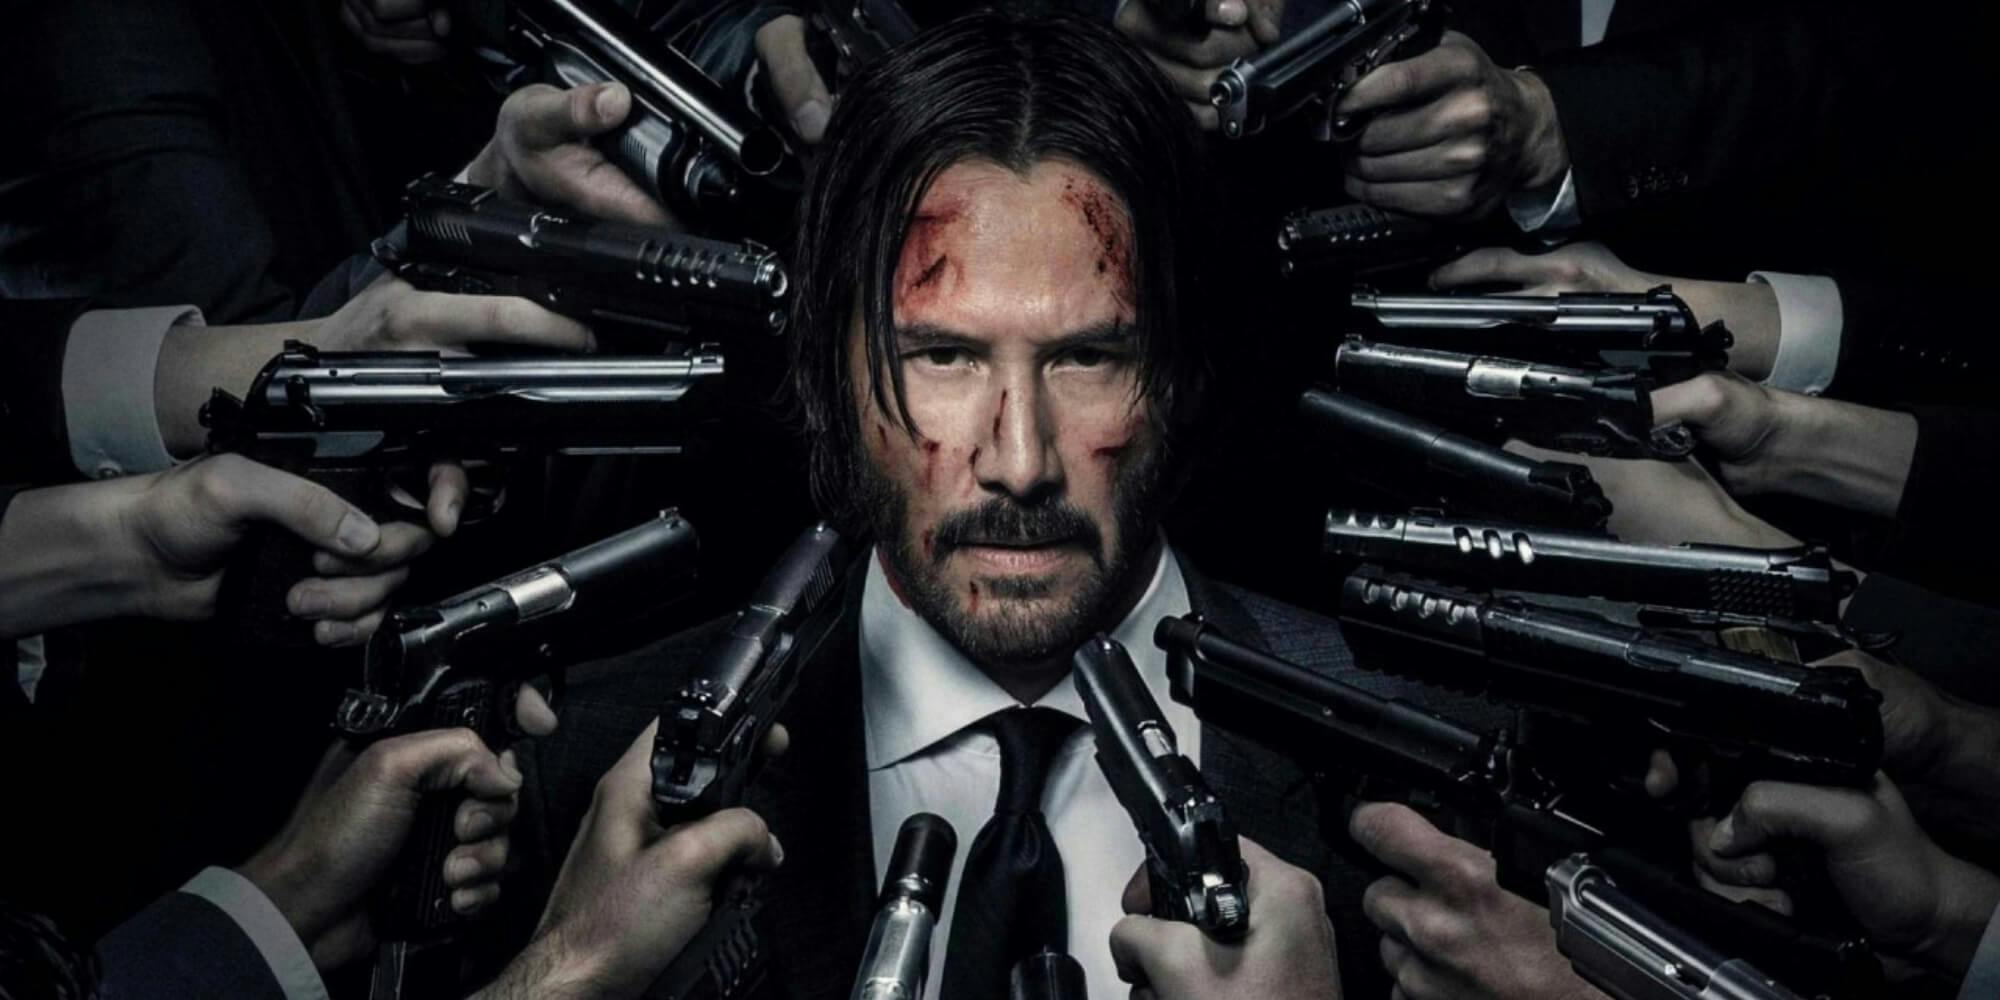 Photo of the movie John Wick where Keanu Reeves is surrounded by bad guys pointing guns at his face.